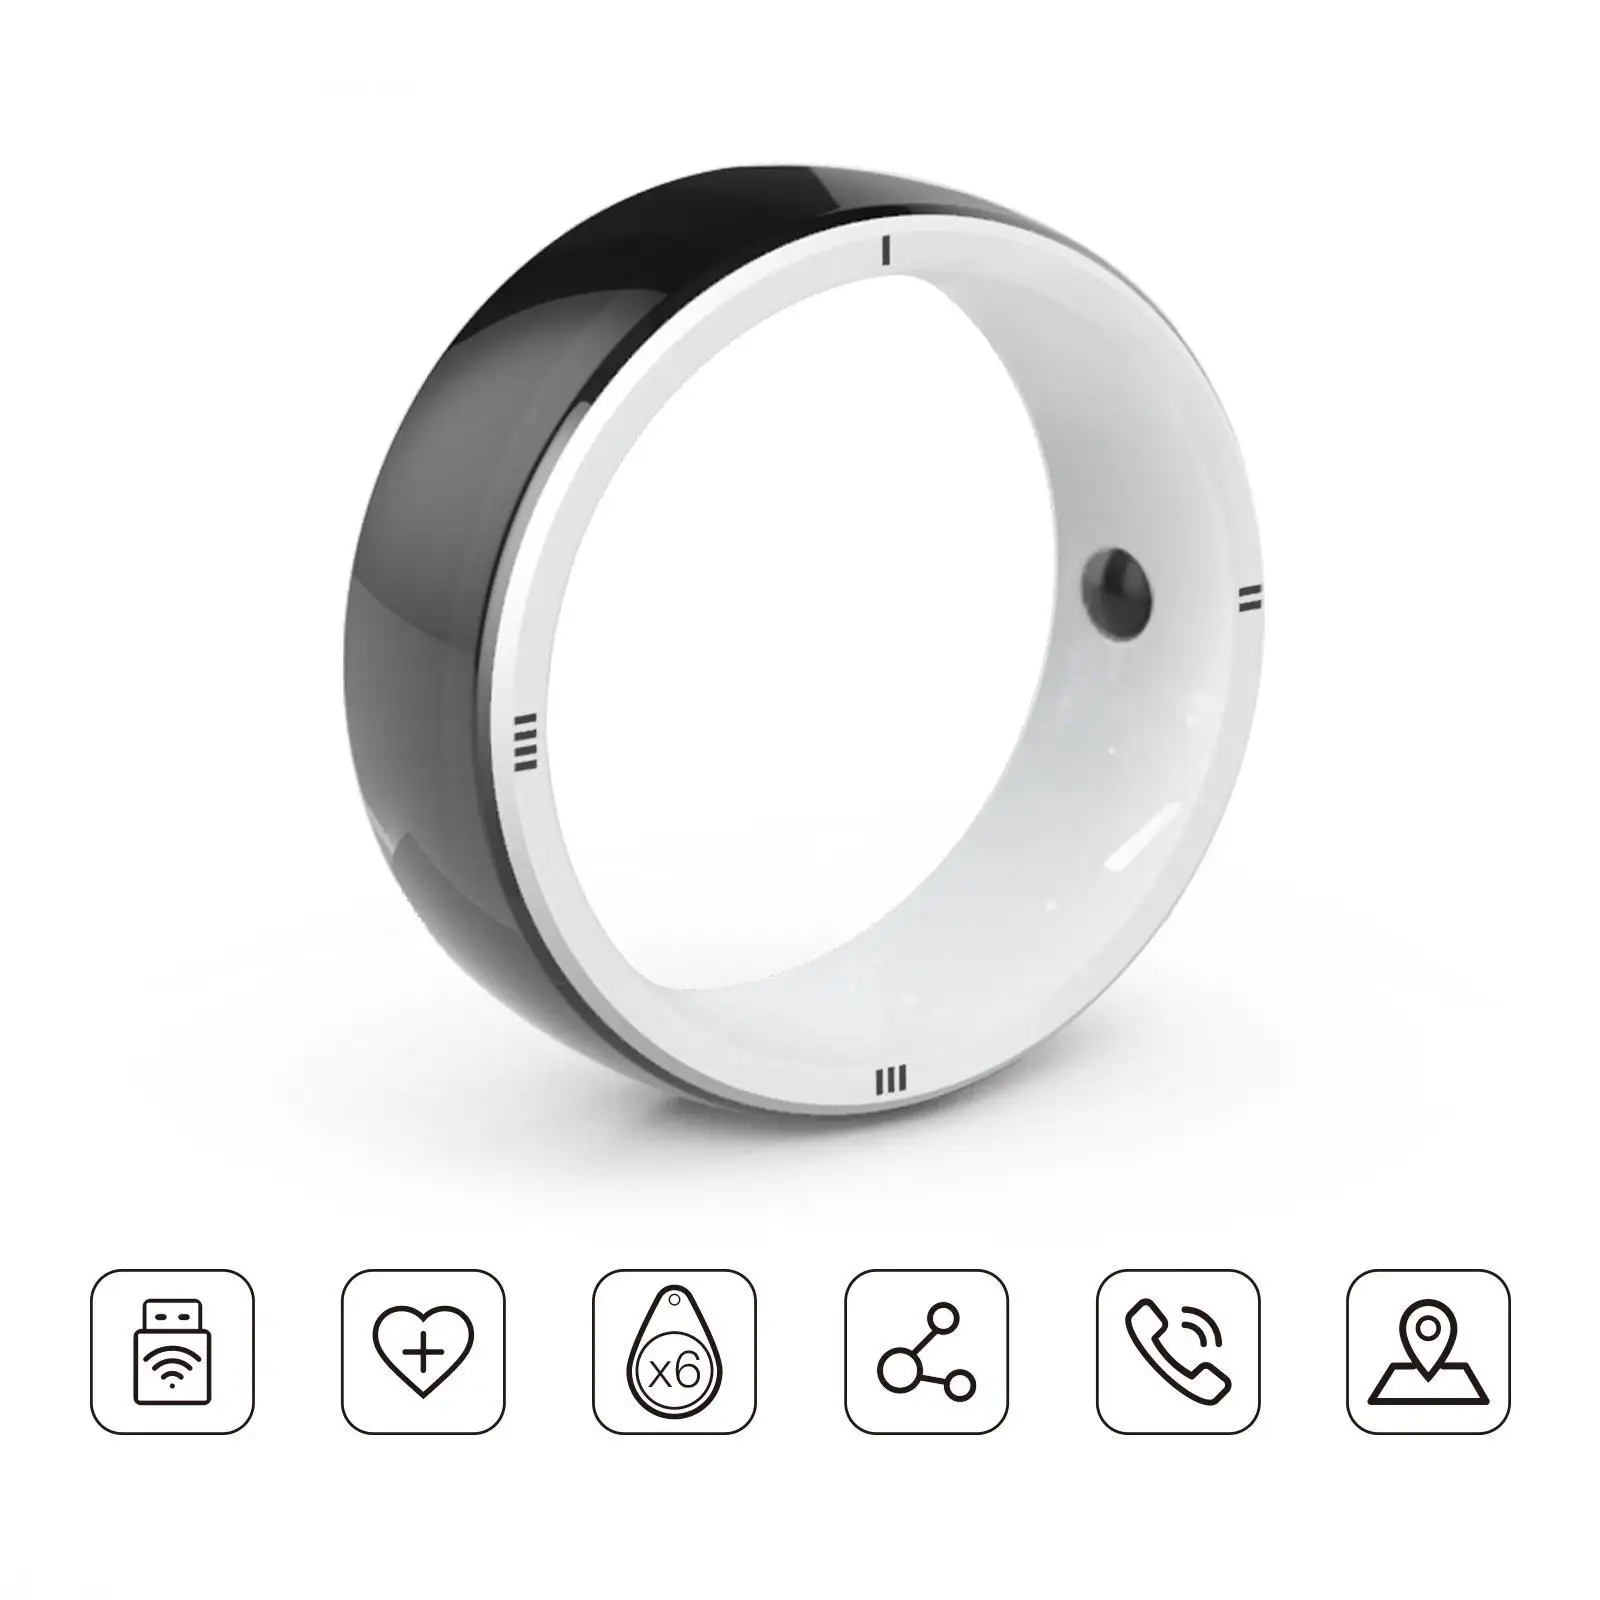 JAKCOM R5 Smart Ring New Smart Ring Best gift with android tv cracked apk ssd external hard drive 1tb bracket wall mount crt